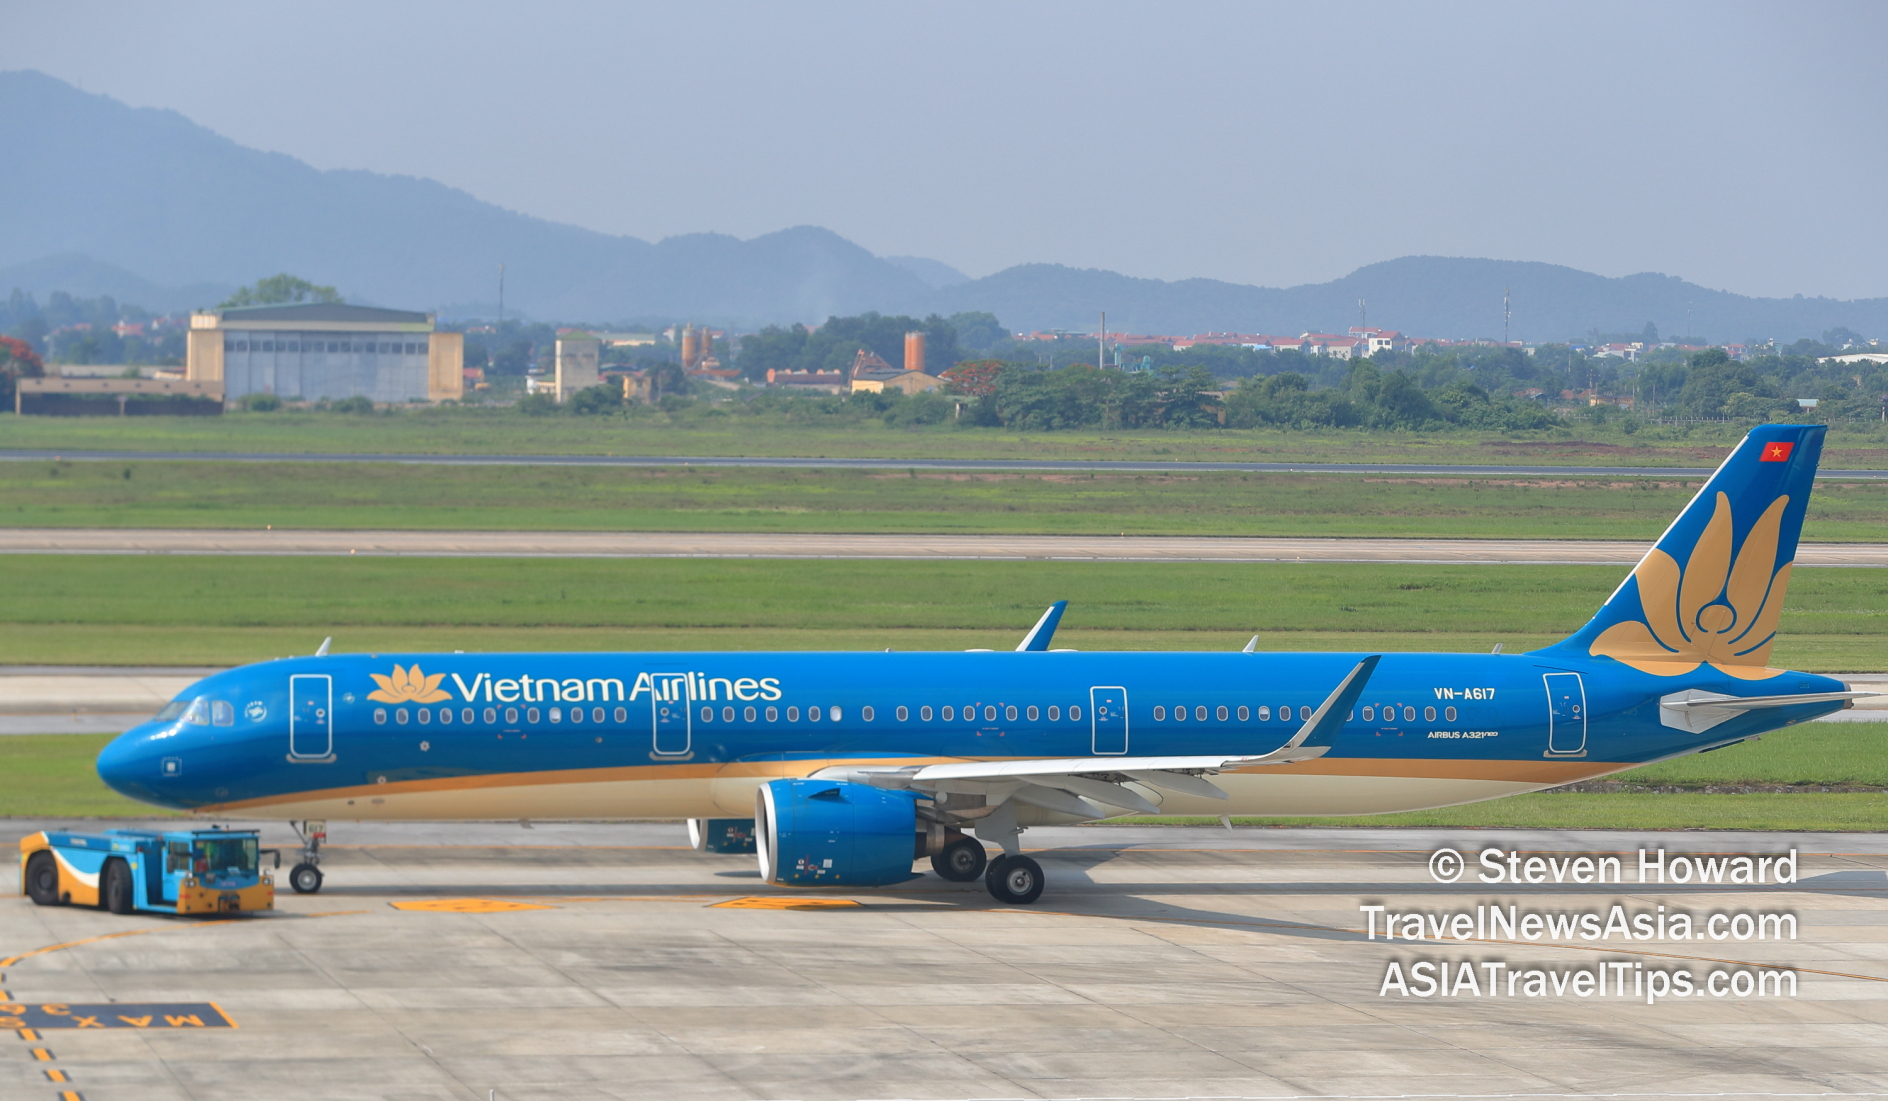 Vietnam Airlines A321neo reg: VN-A617. Picture by Steven Howard of TravelNewsAsia.com Click to enlarge.